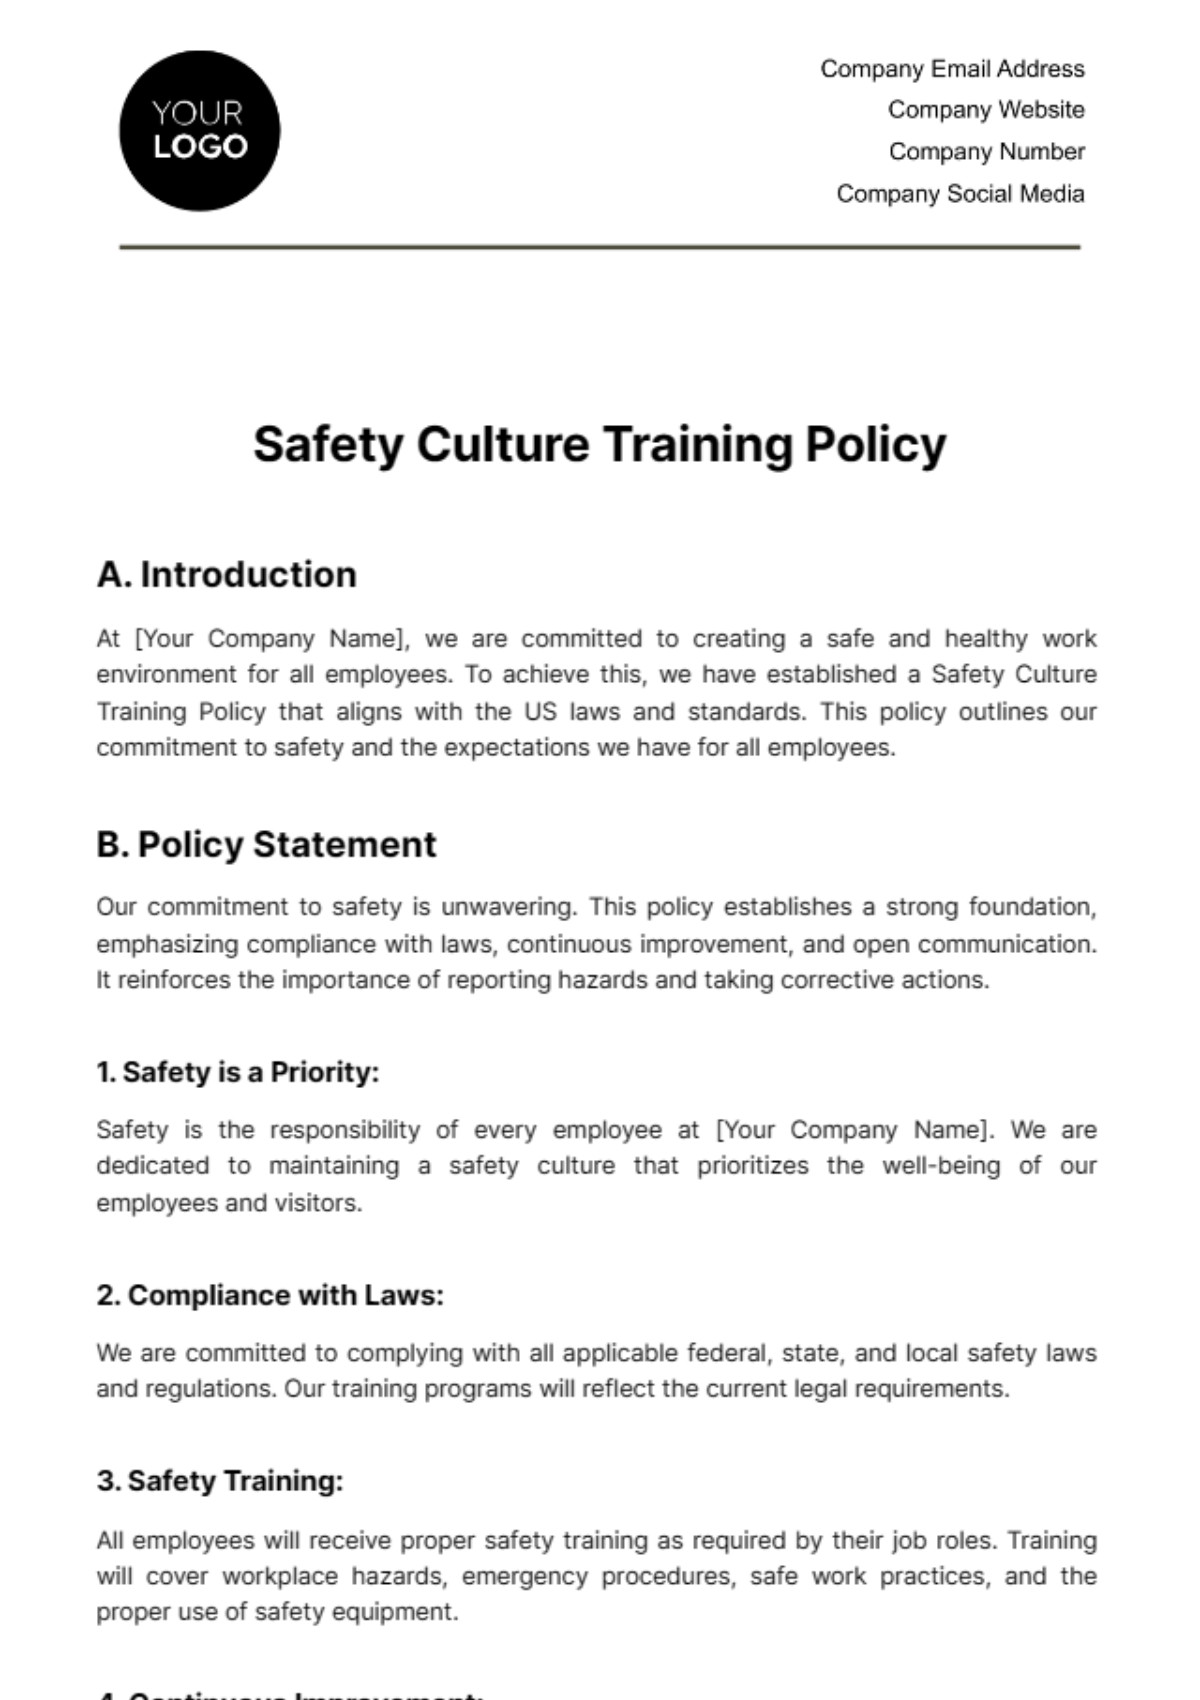 Safety Culture Training Policy Template